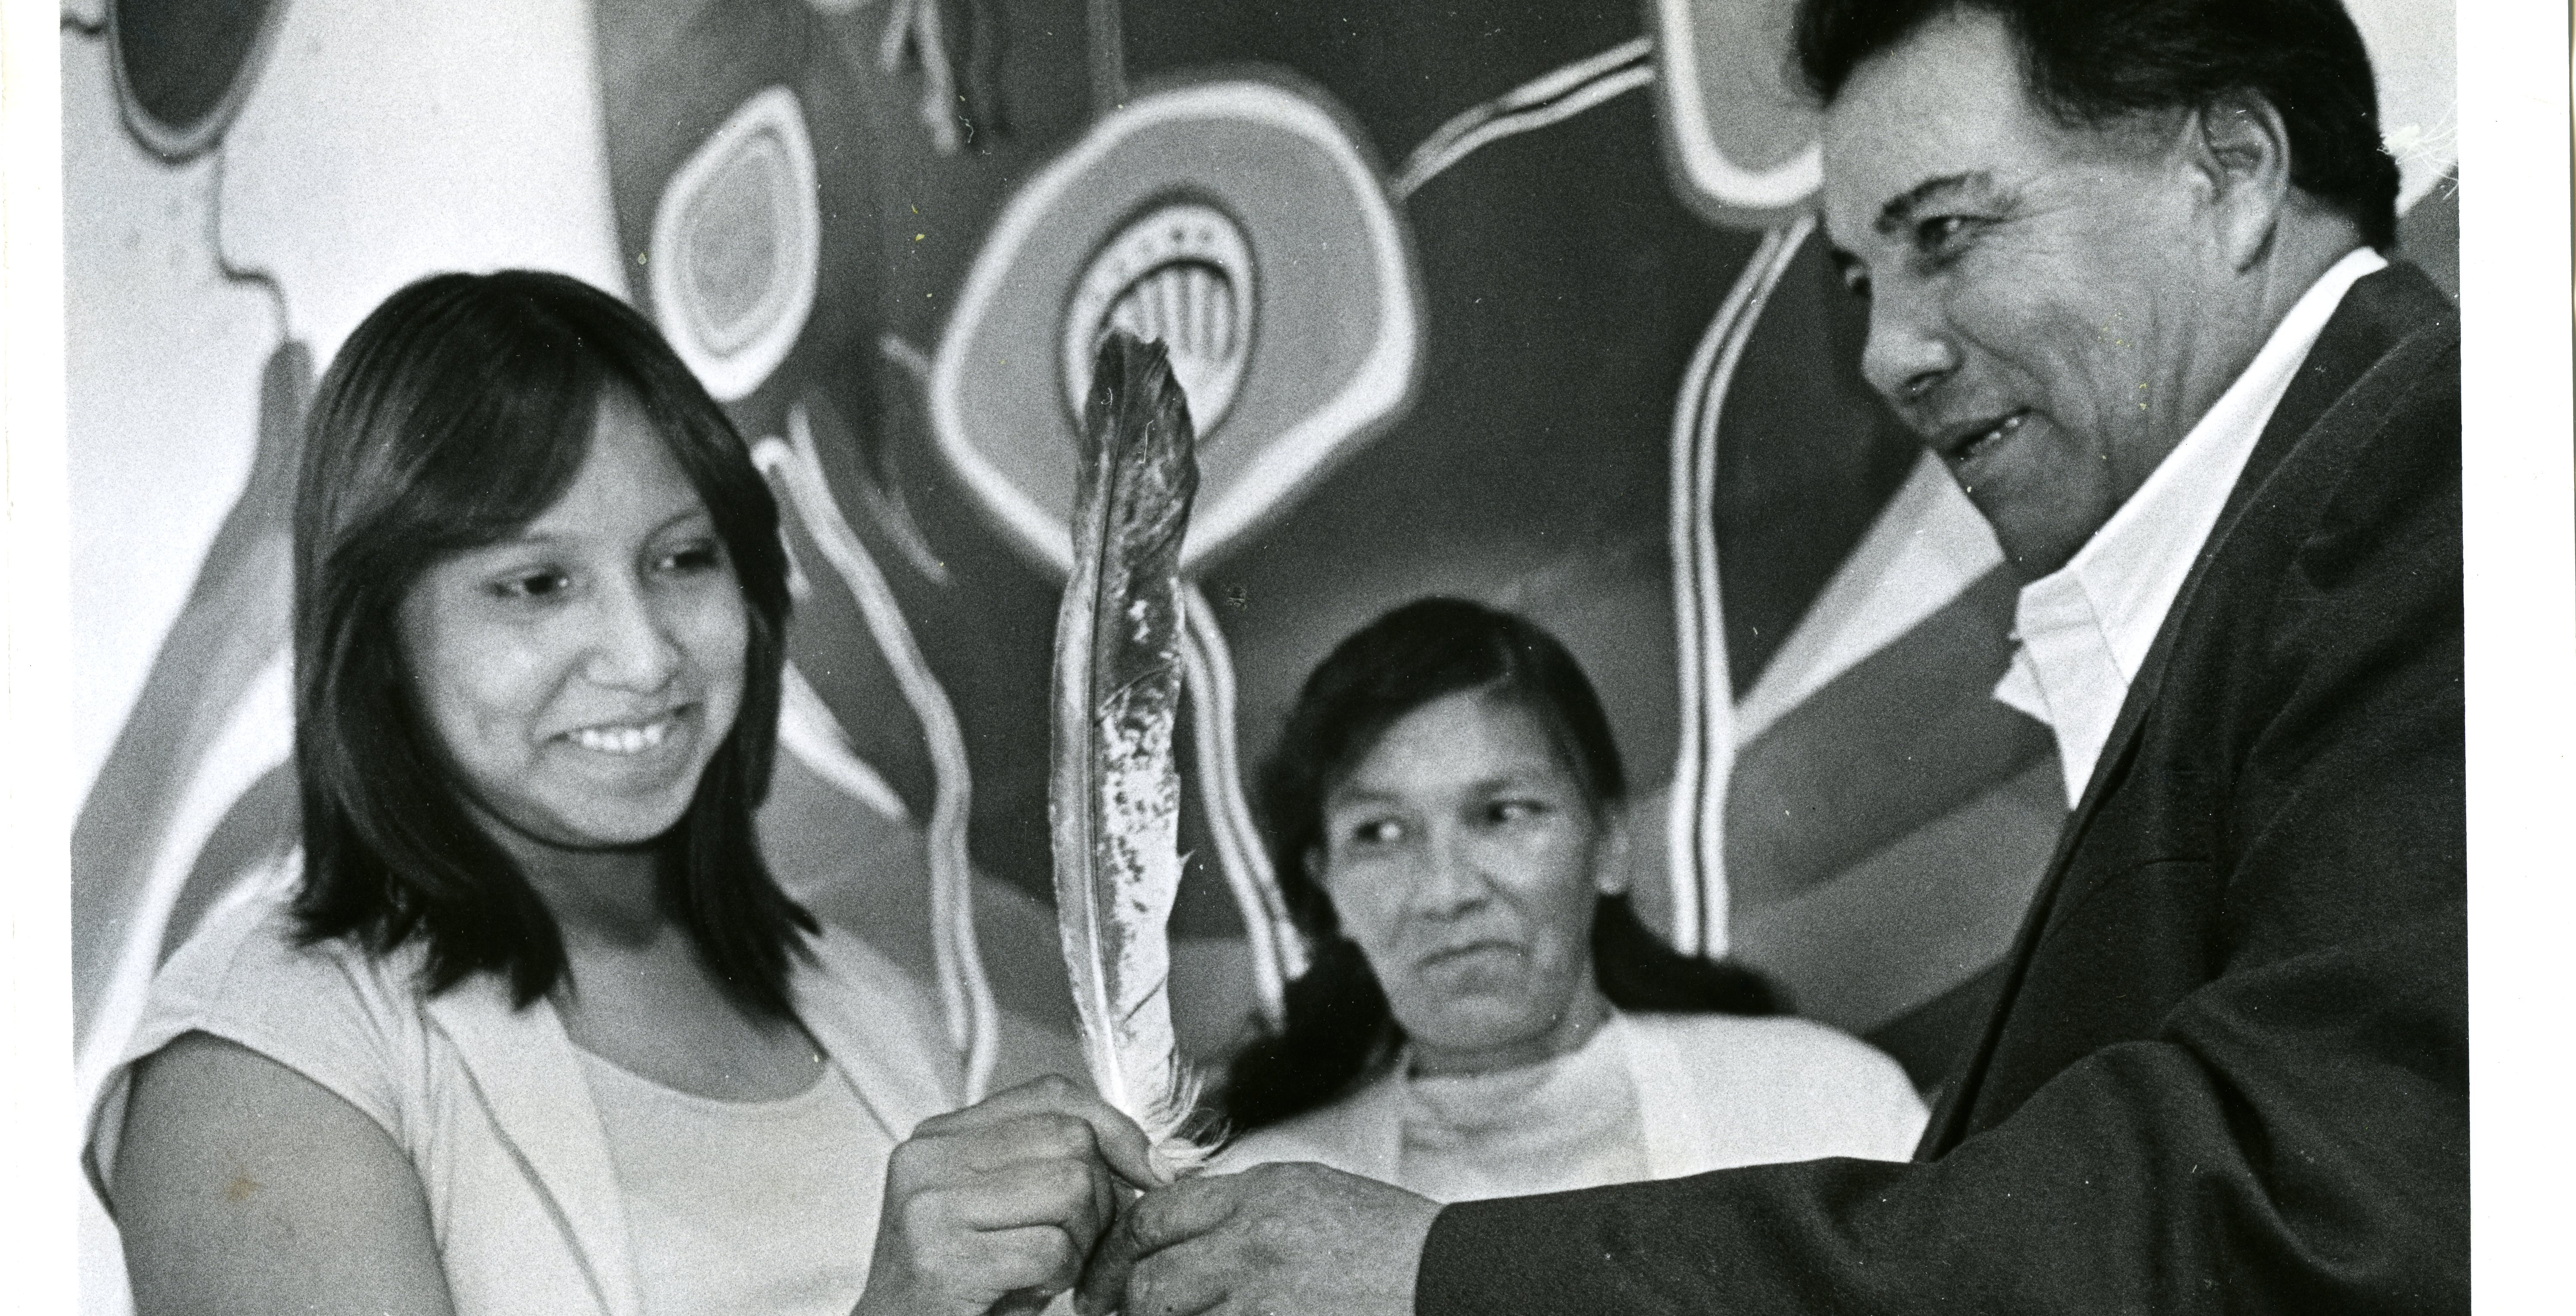 University of Manitoba Archives & Special Collections. Winnipeg Tribune fonds. Hilda Fisher receives an eagle feather from Chief Harry Cook of the Bloodvein First Nation to mark her high school graduation at a ceremony at the Winnipeg Indian and Métis Friendship Centre, July 26, 1980  (PC18-2945-1).